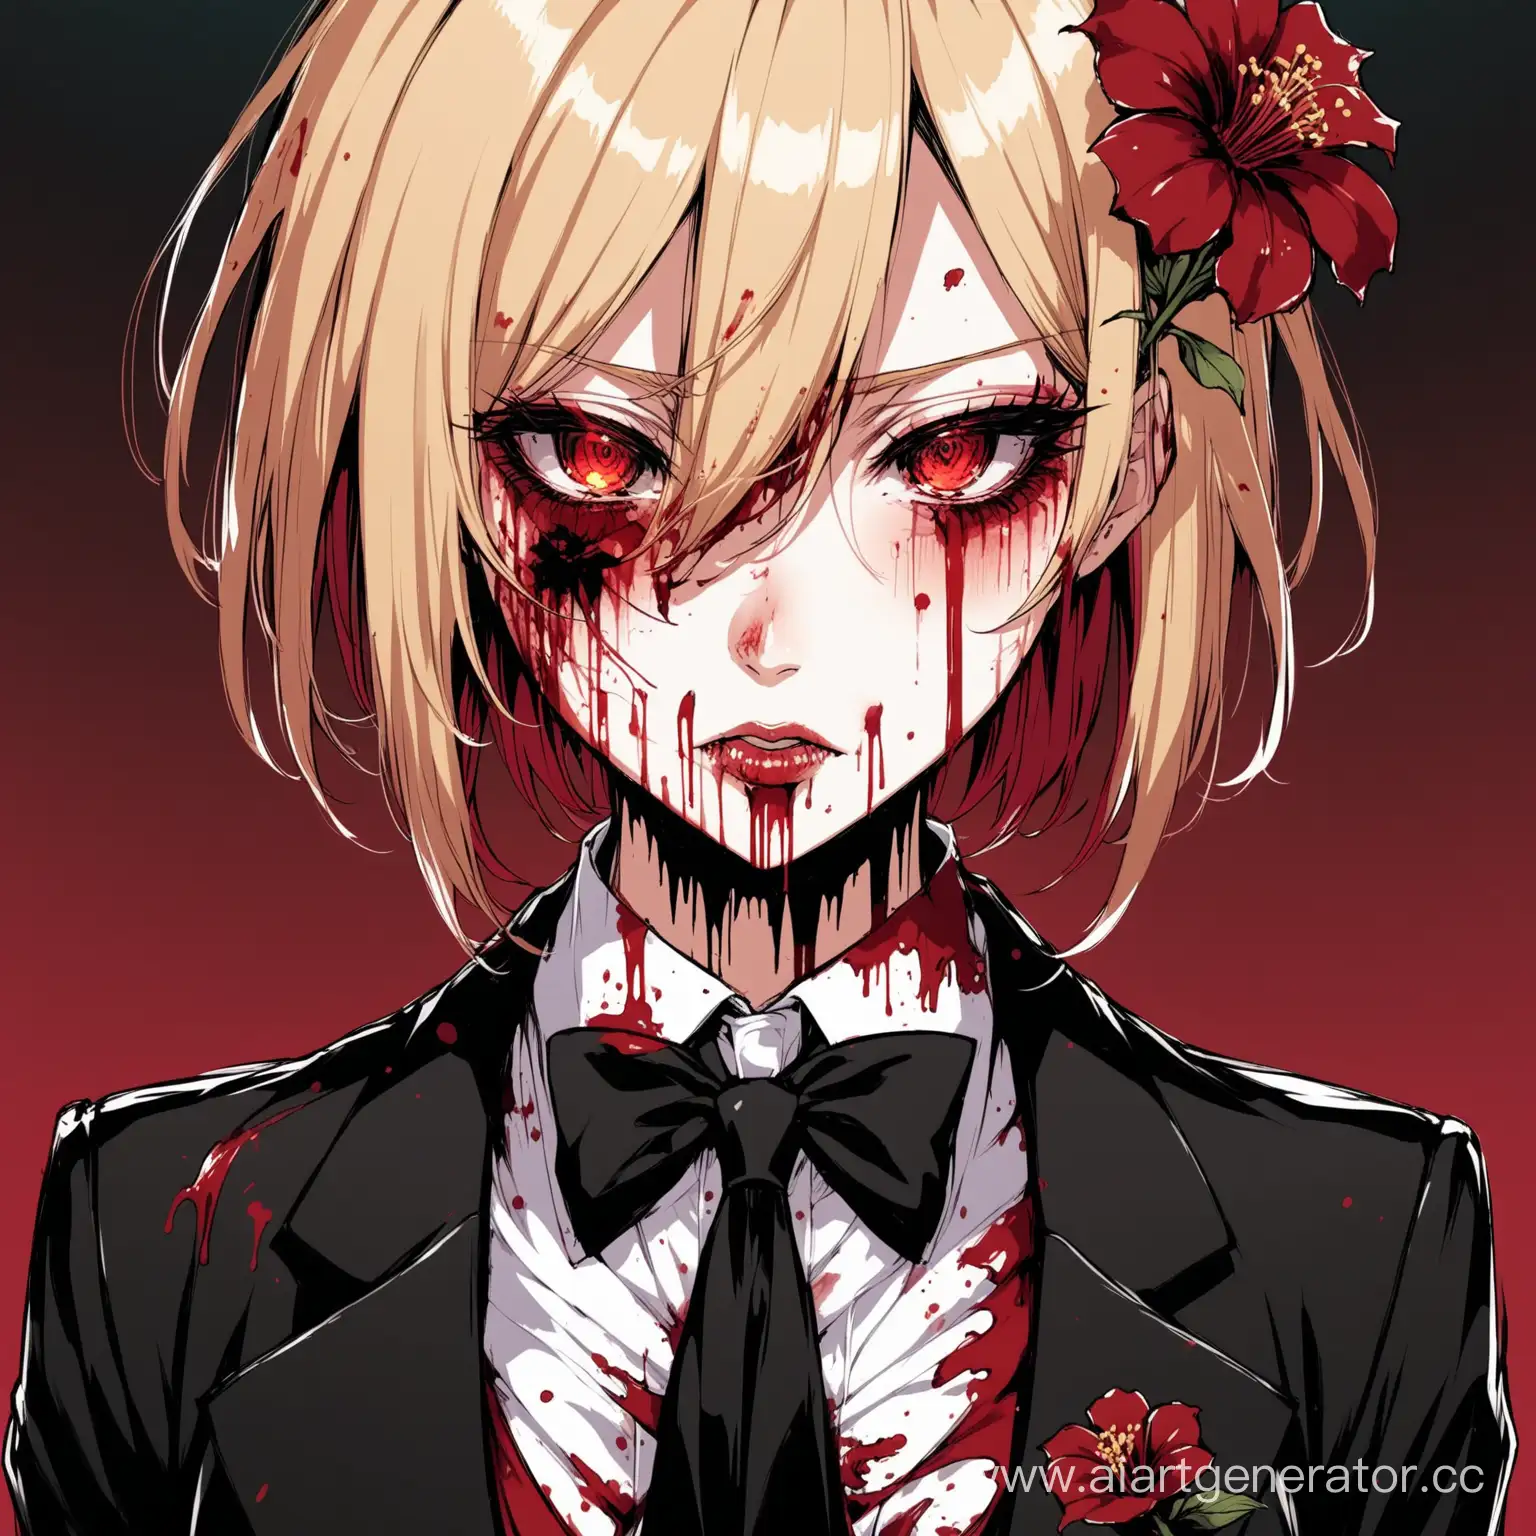 Anime-Style-Female-Character-in-Bloodied-Tuxedo-with-Higanbana-Flower